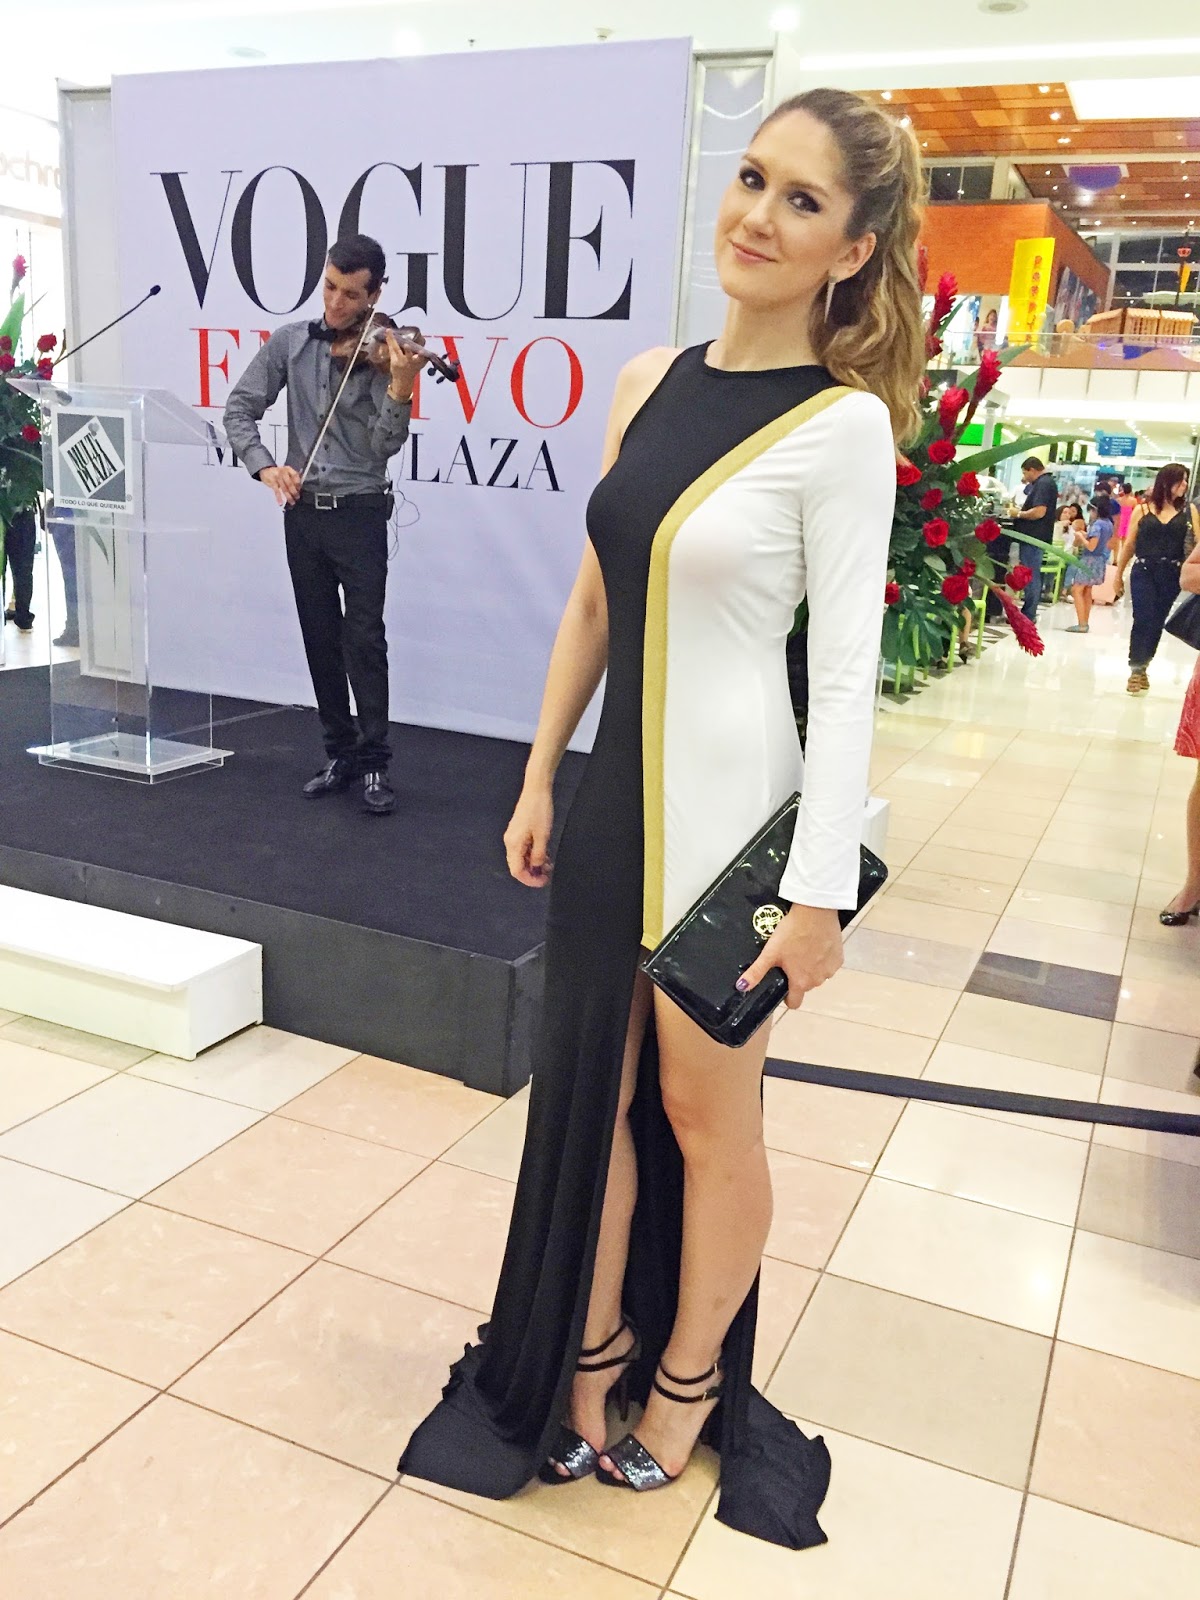 Live violin at the Vogue Live event of Multiplaza Pacific!